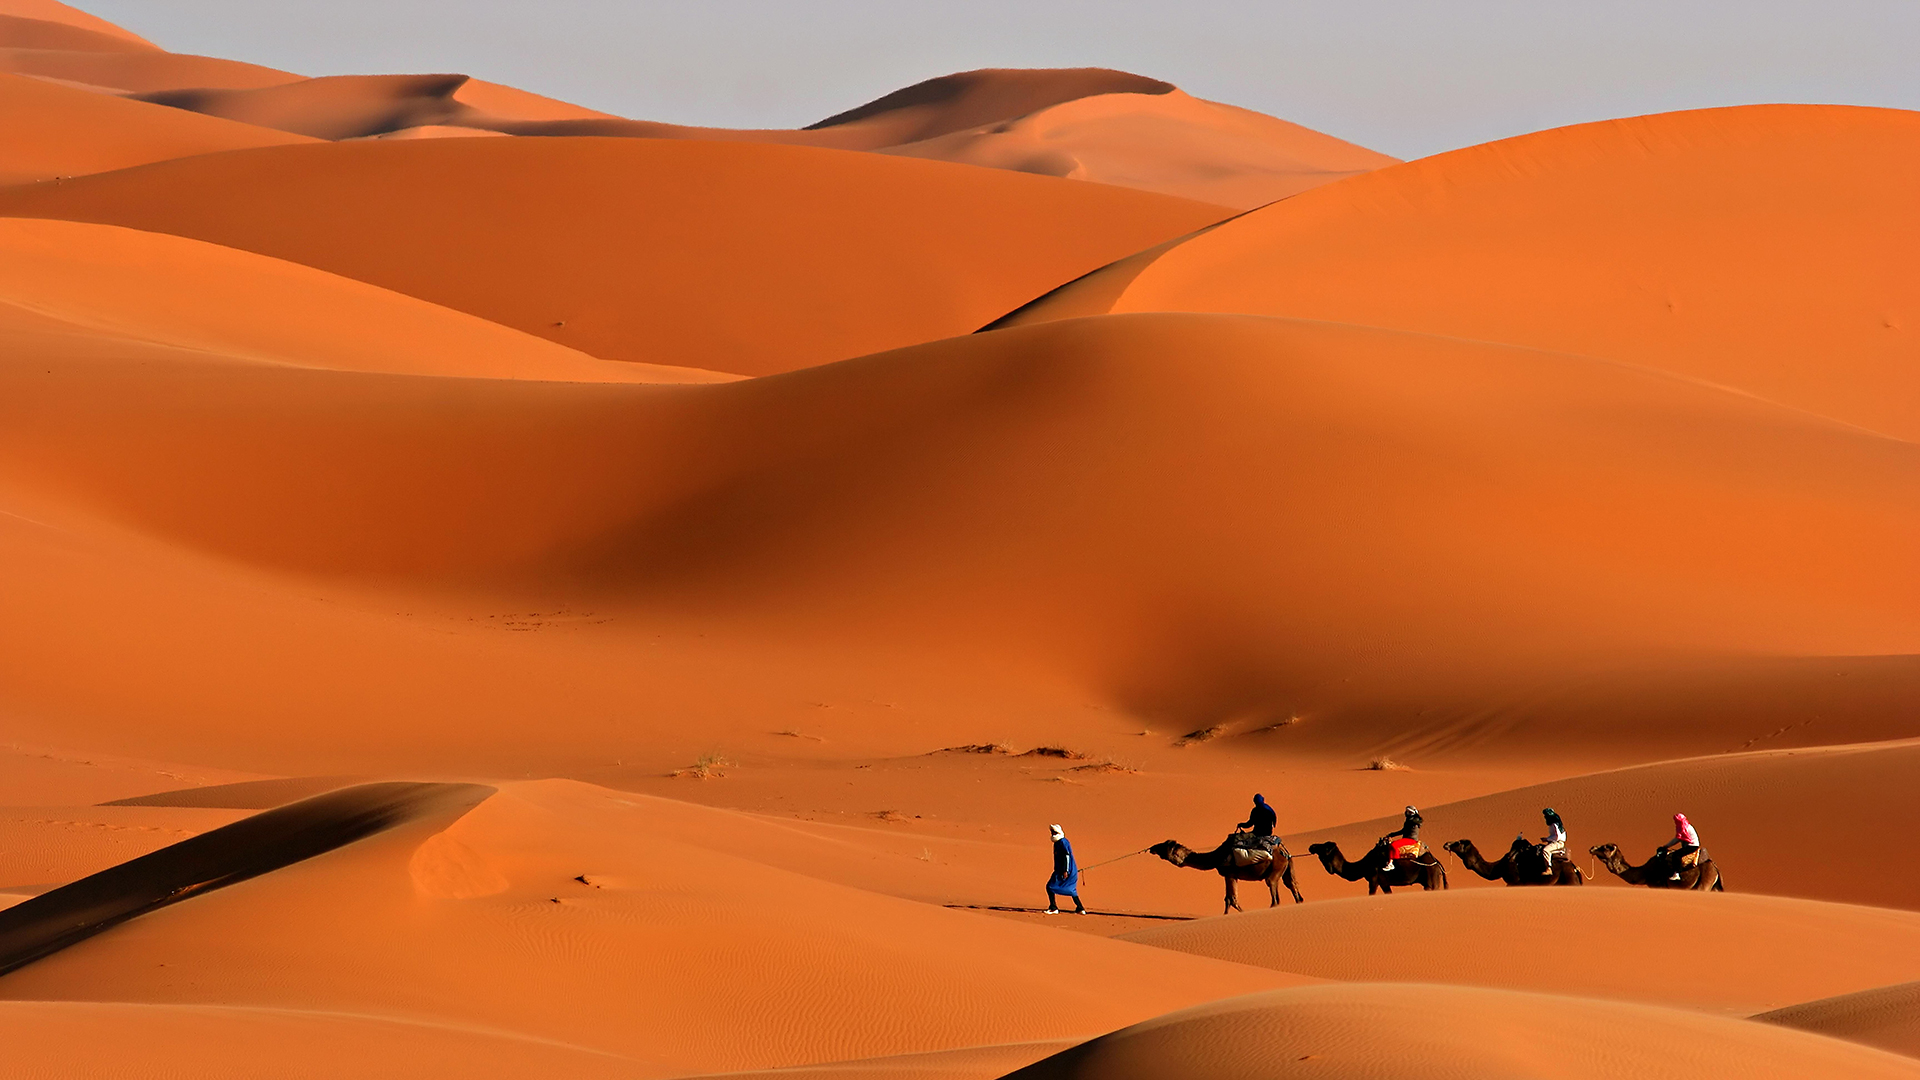 Sand Dunes With Camels - 1920x1080 Wallpaper 